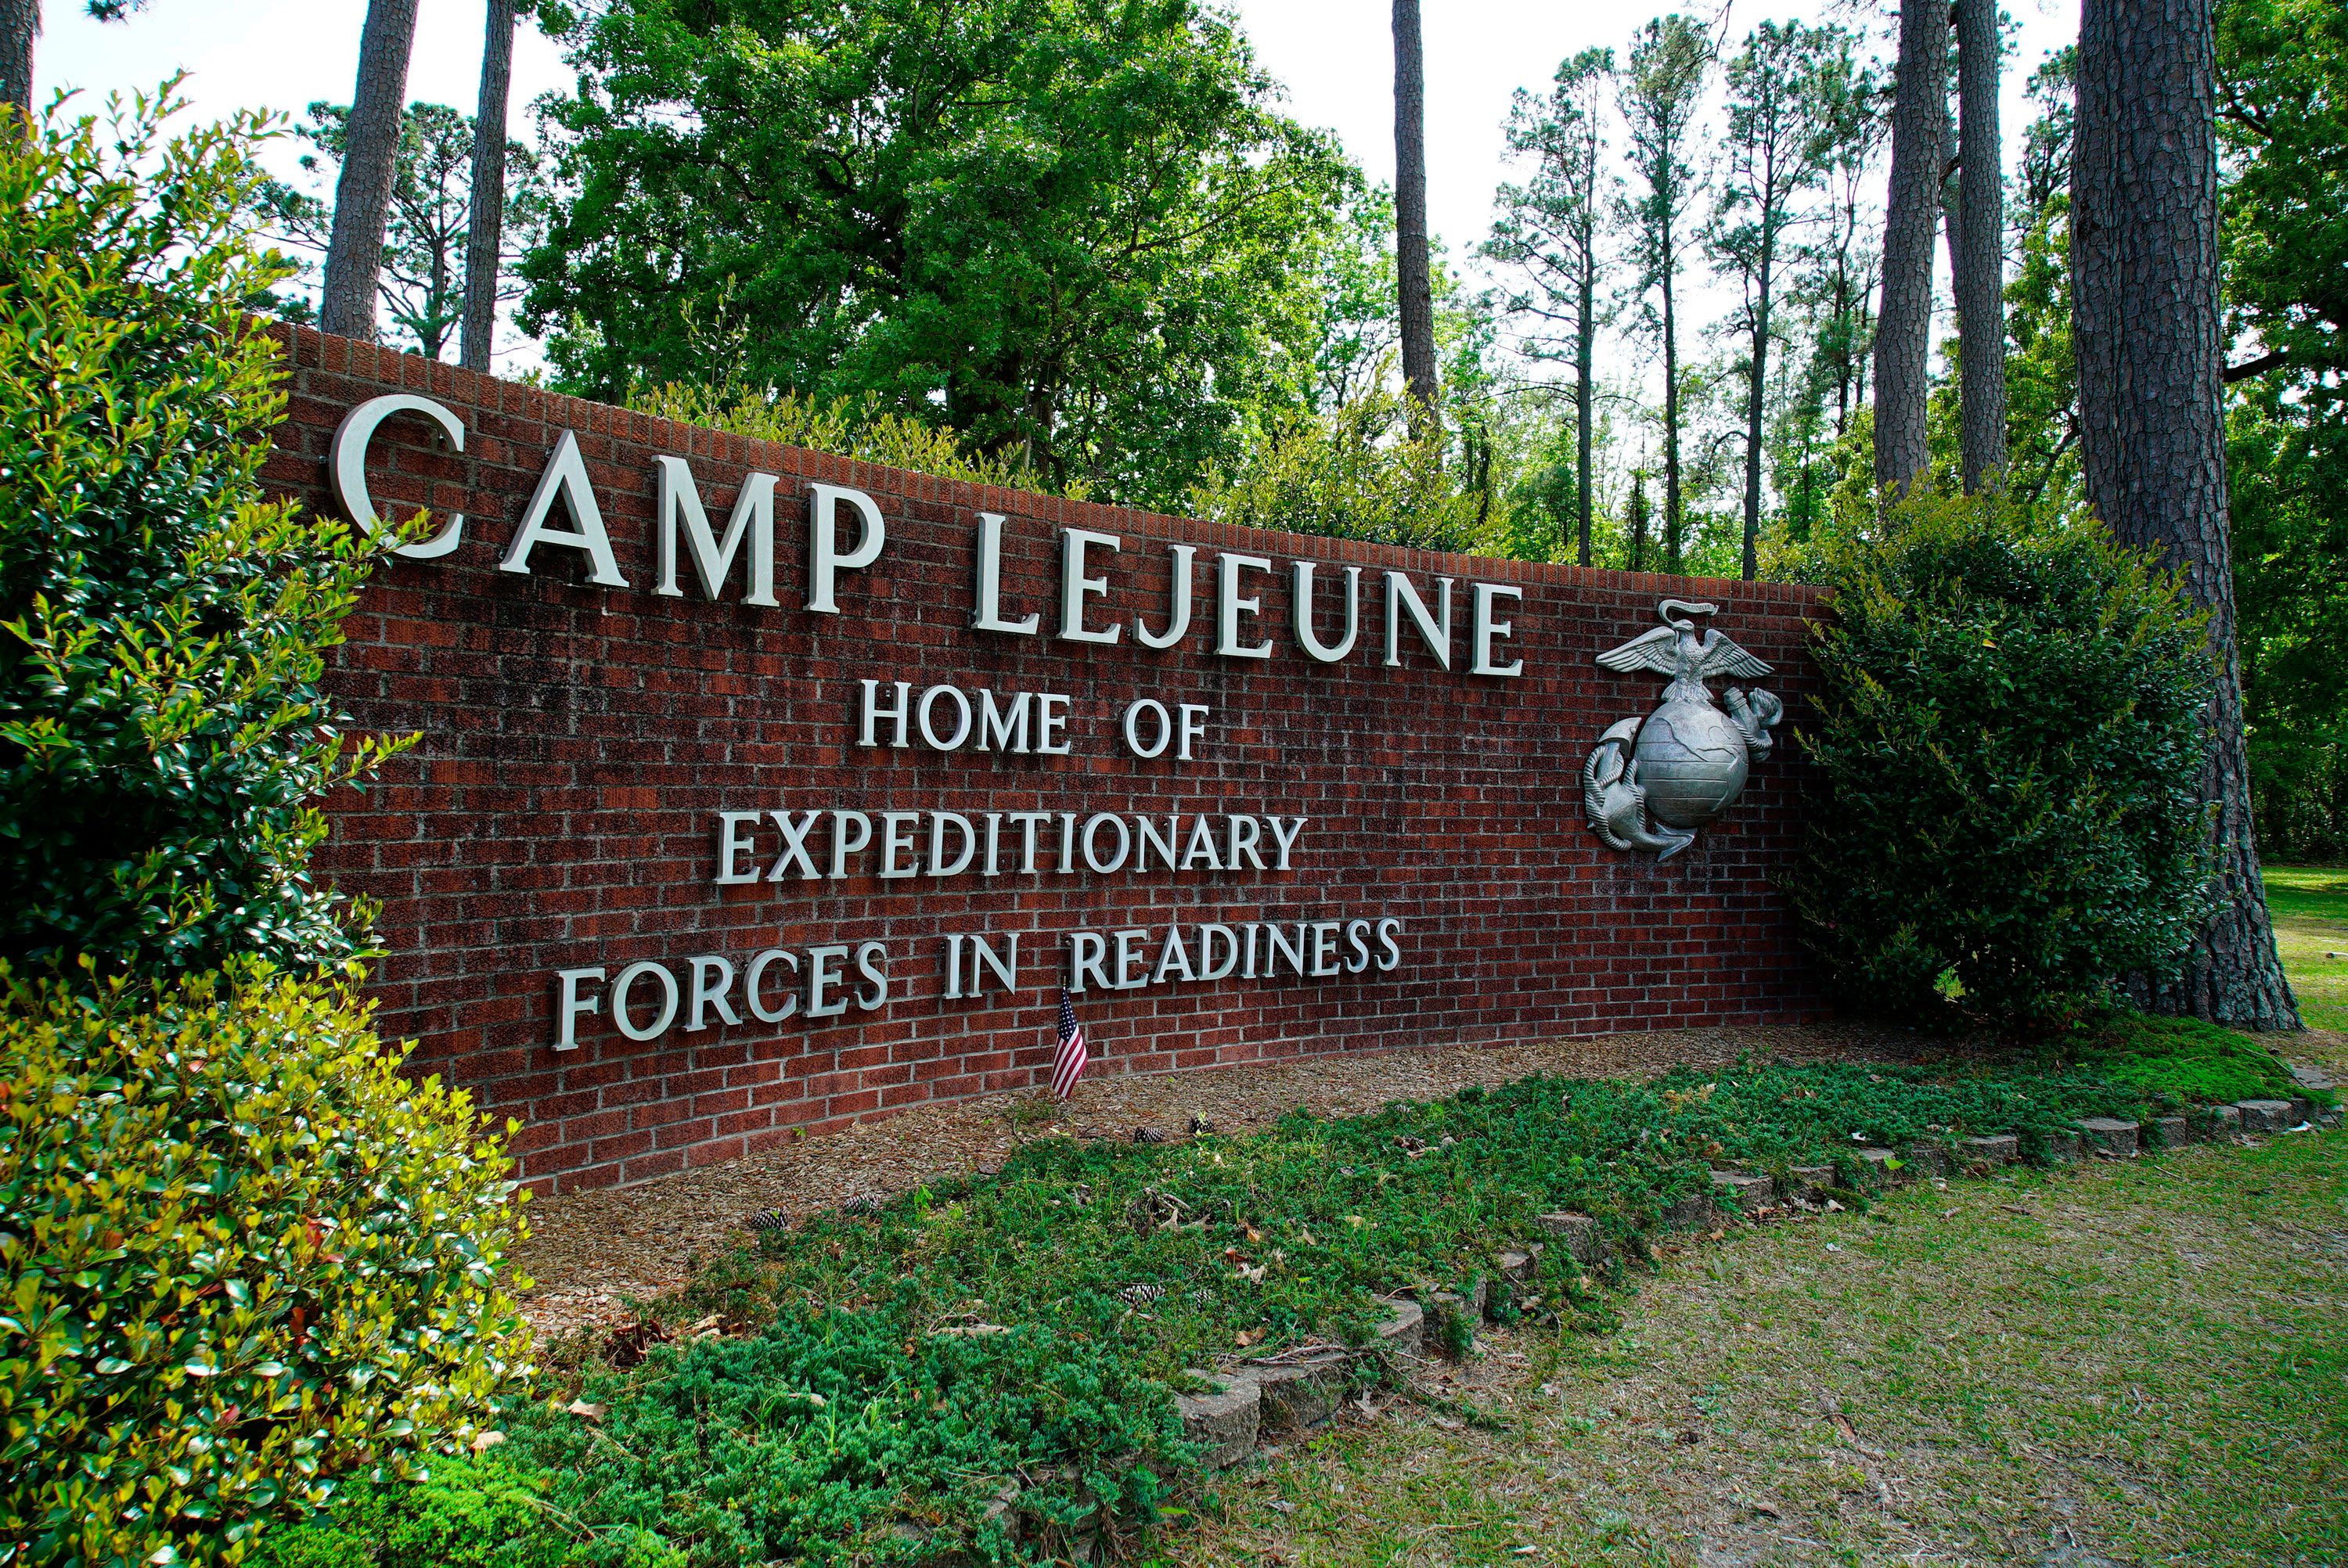 Camp Lejeune water contamination cases increasingly becoming wrongful death claims as lawsuits proceed at a crawl (cnn.com)